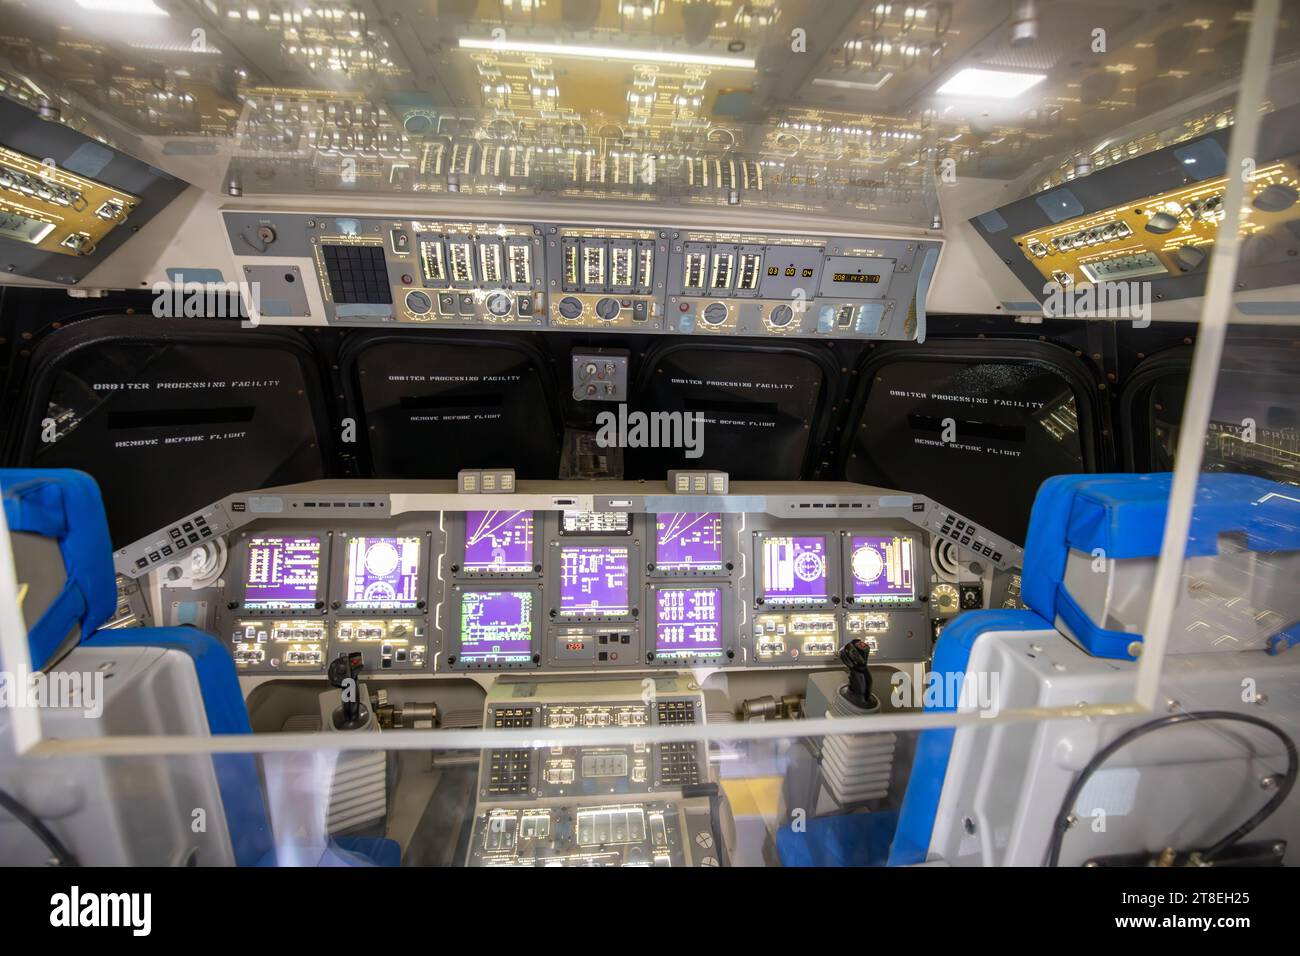 Houston, USA - October 22, 2023: A Space Shuttle cockpit on display at Houston Space Center in Texas, USA Stock Photo